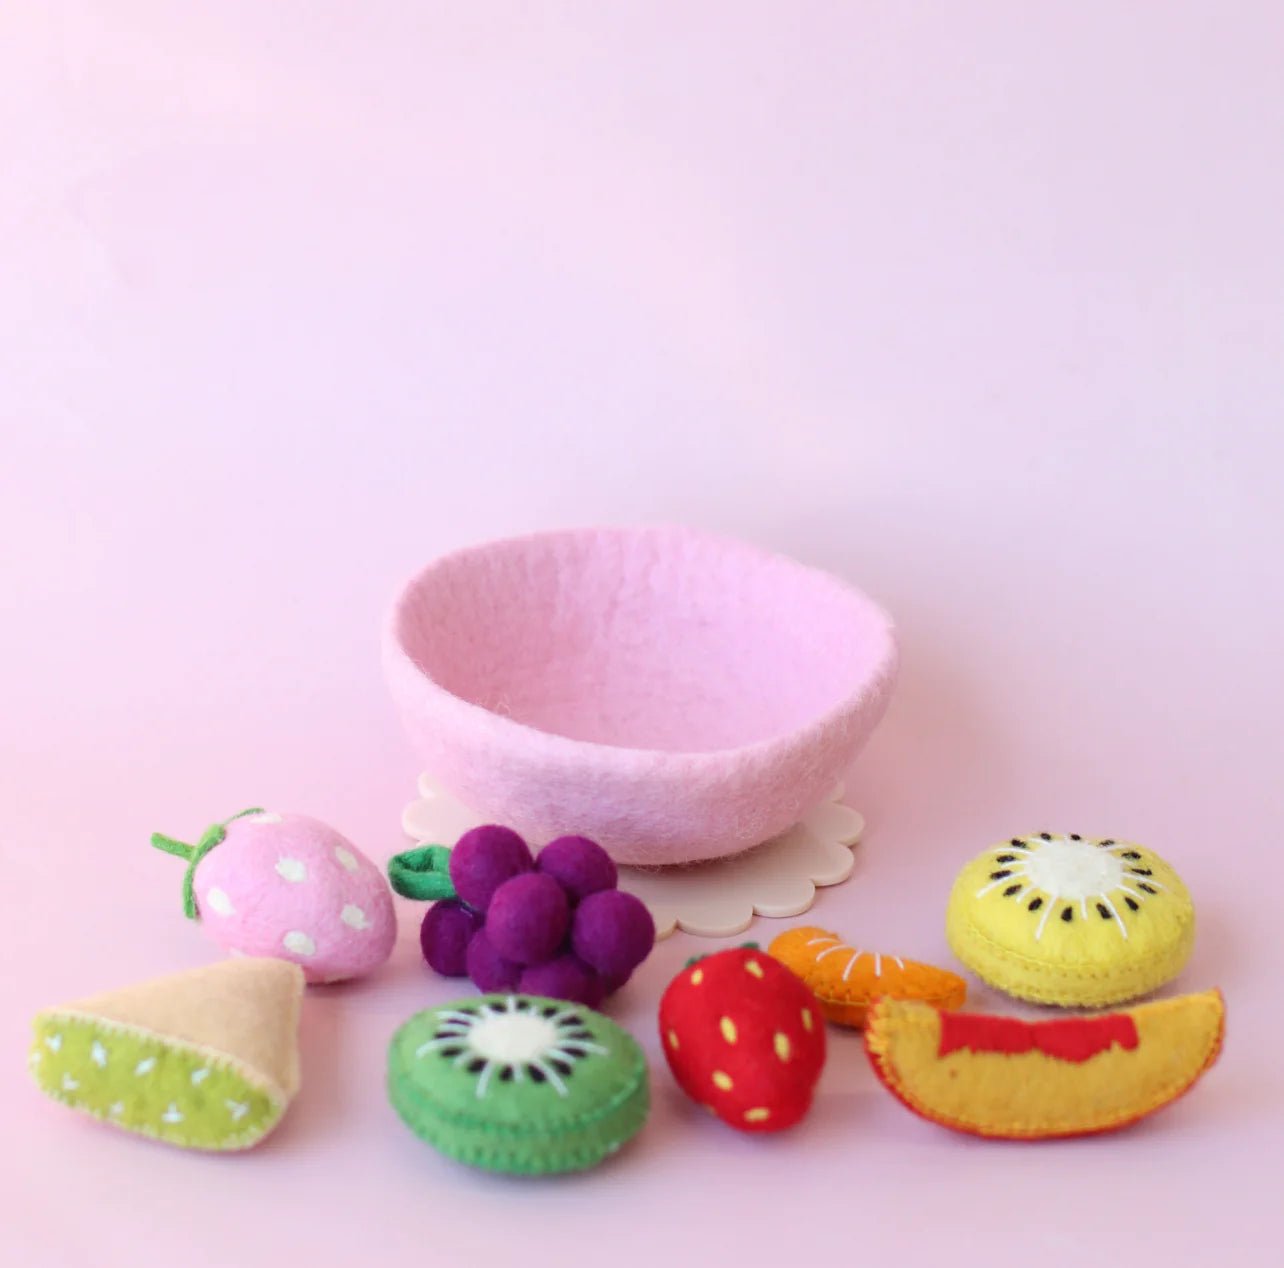 JUNI MOON | TUTTI FRUITY FELT FRUIT SALAD WITH BOWL (9 PIECE SET) Pink Bowl by JUNI MOON - The Playful Collective